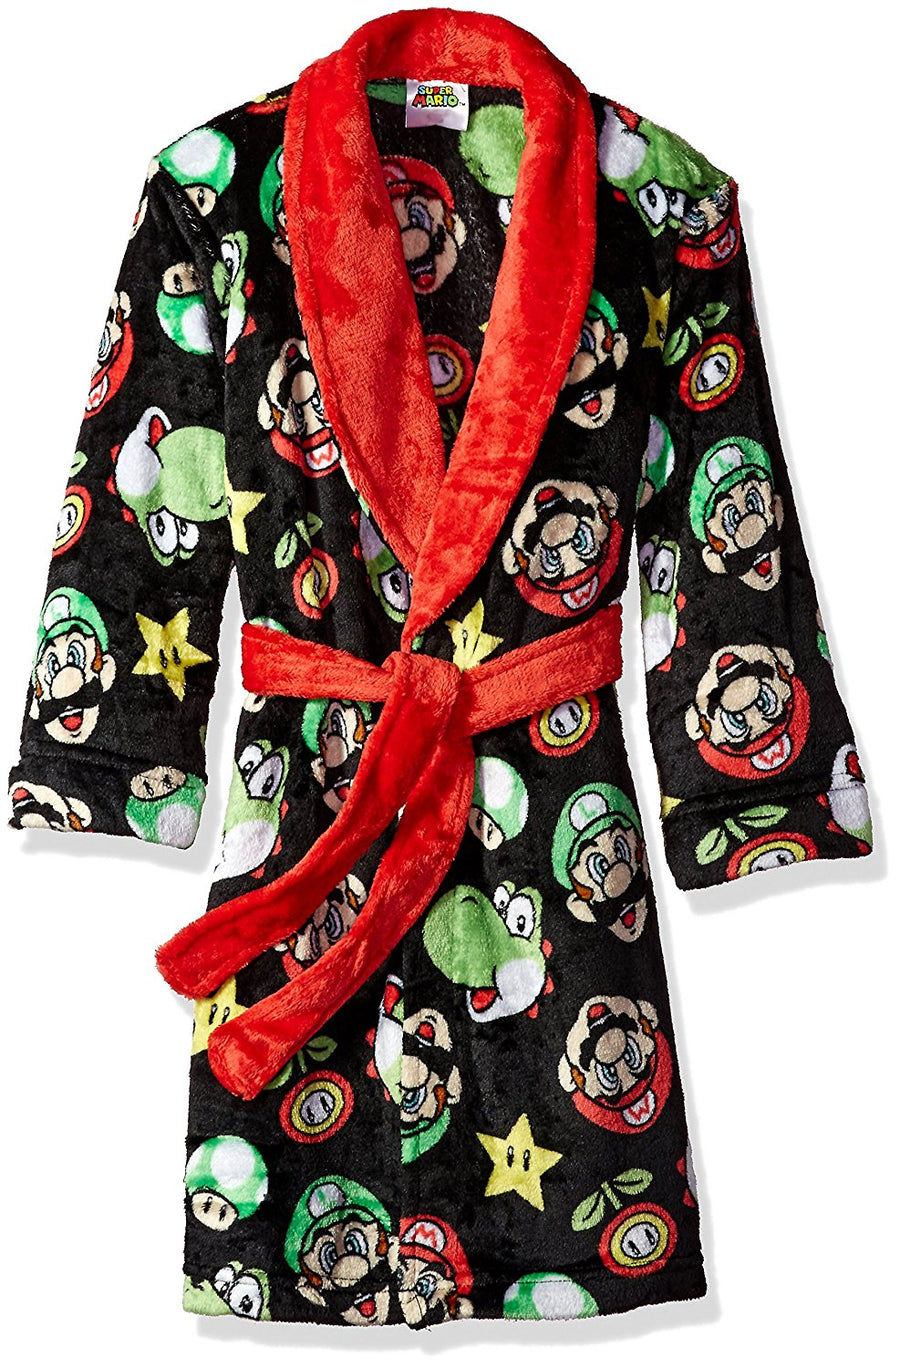 Boys Robes \u0026 Slippers - Character's Apparel